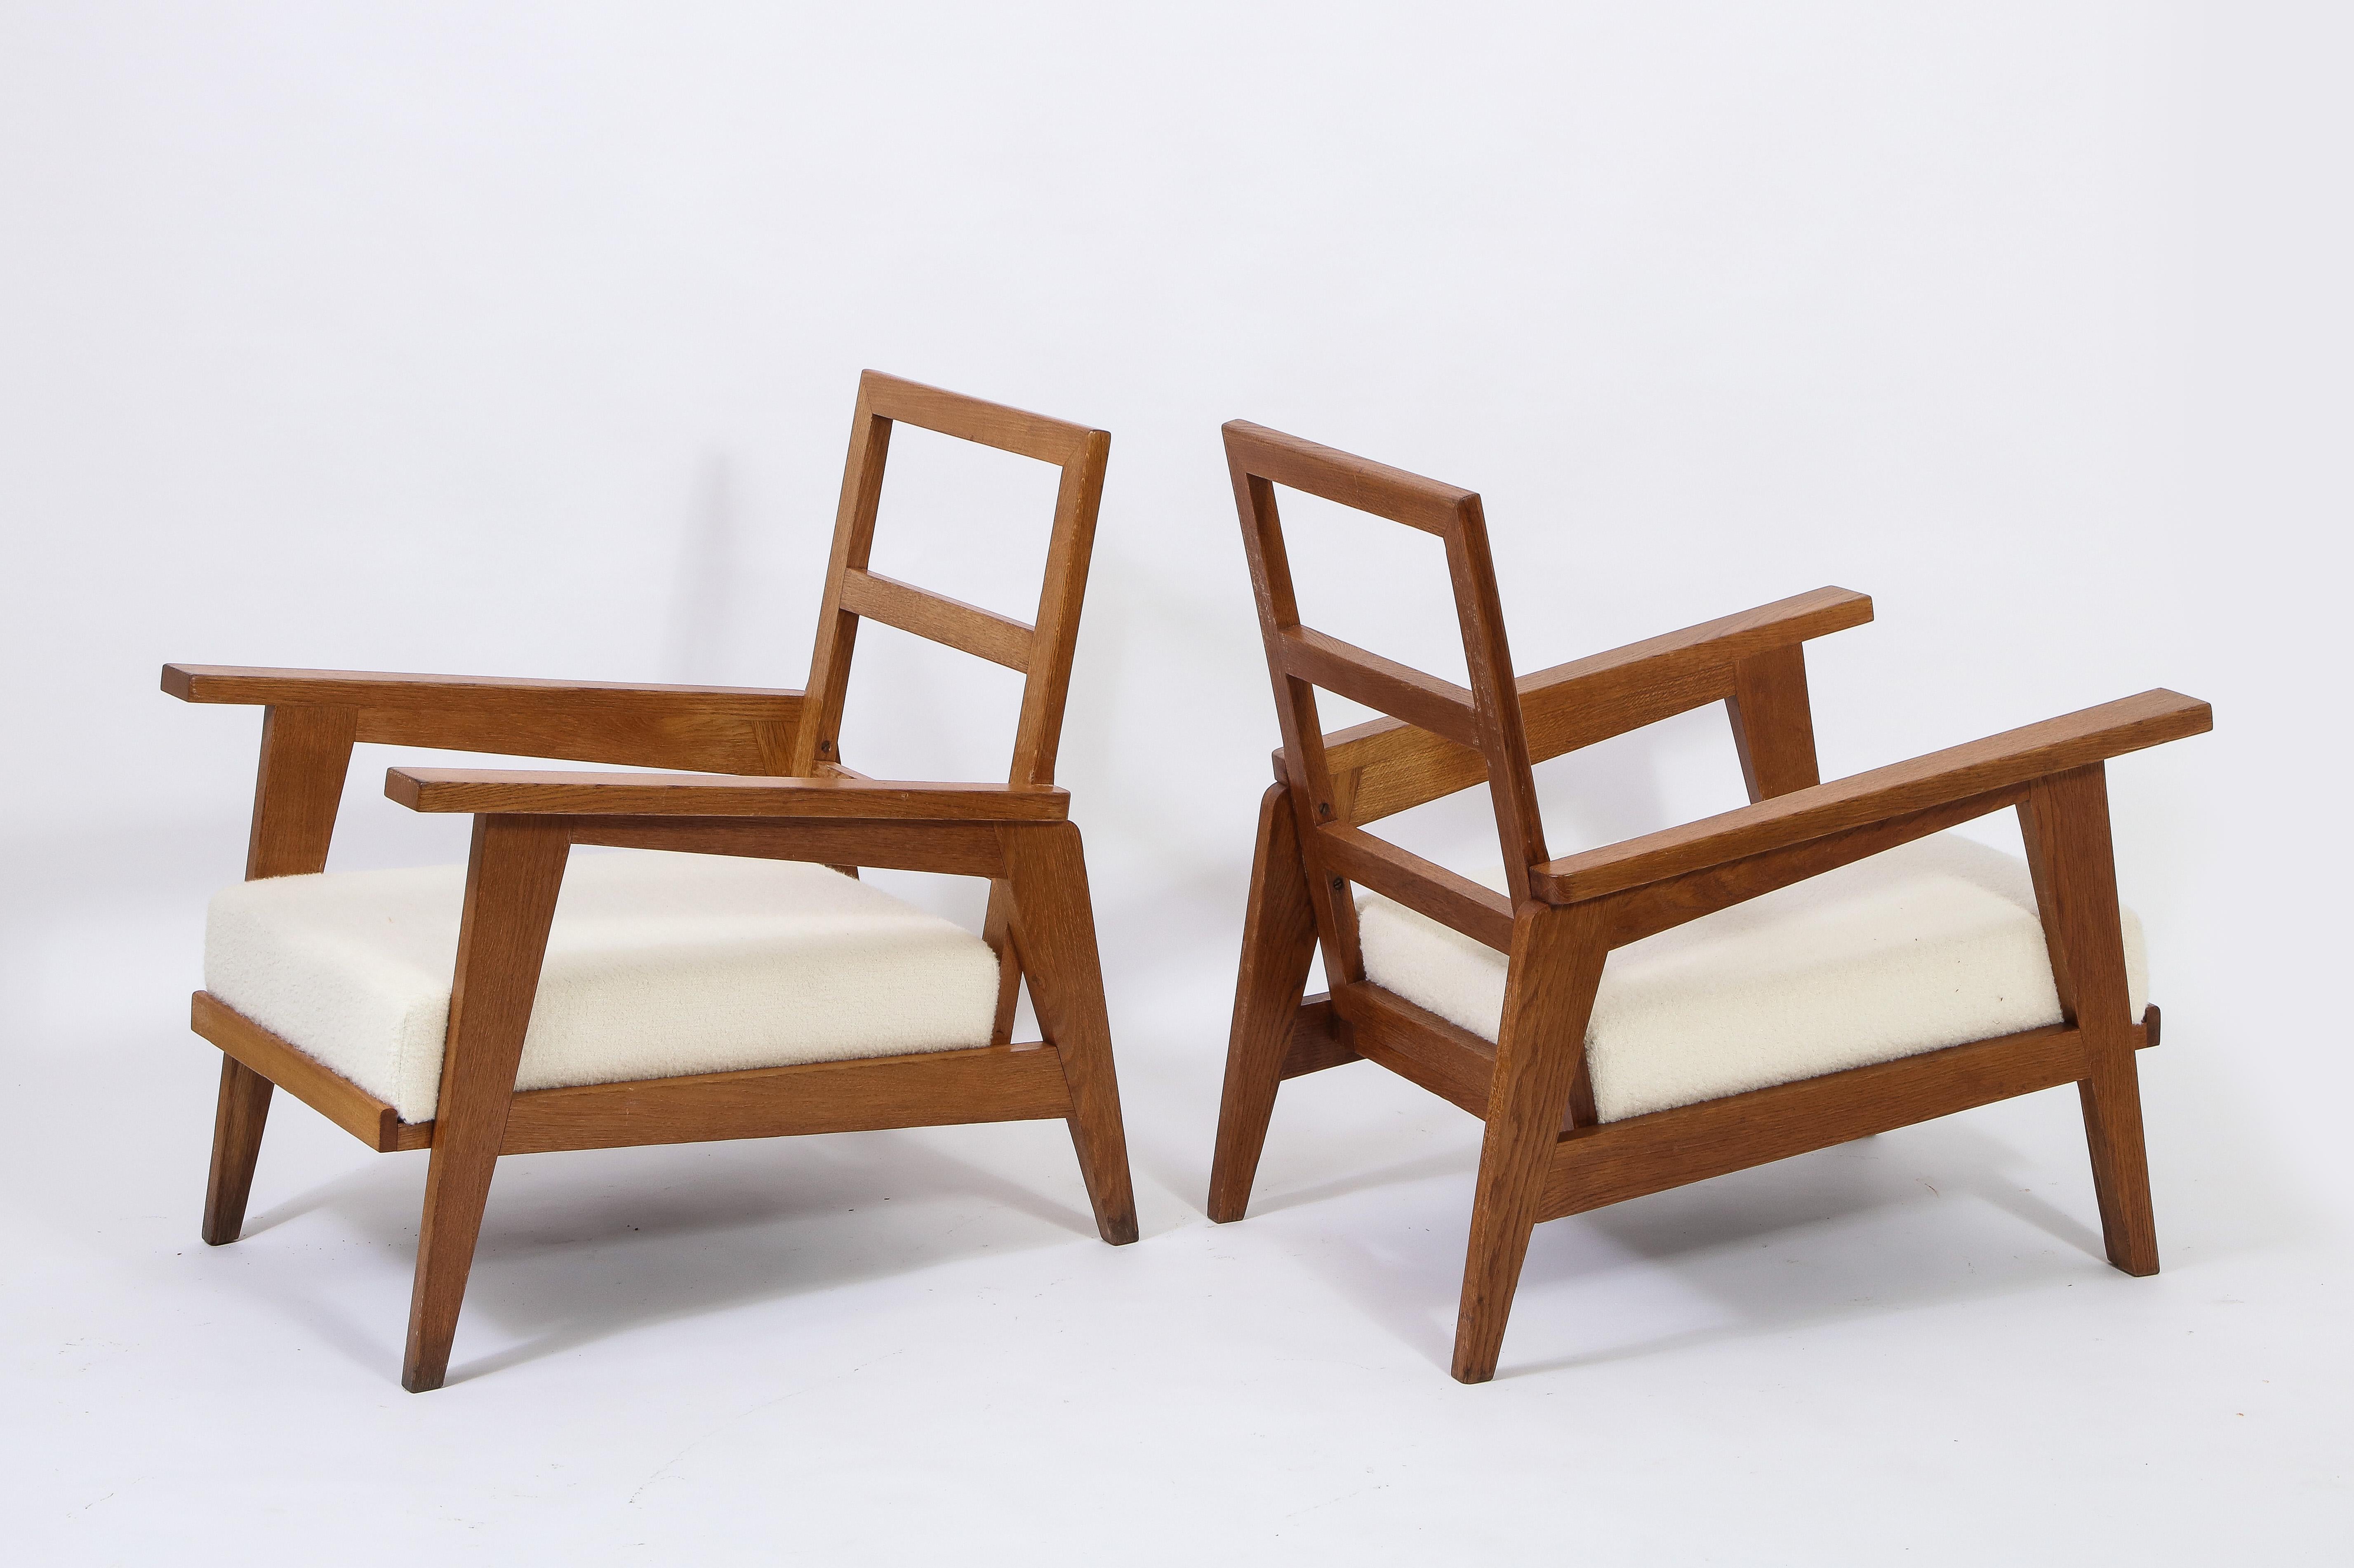 Pair of oak armchairs in the style of Rene Gabriel from the reconstruction postwar period that saw many French designers use simple lines and oak. Upholstered in boucle, custom back pillow available.